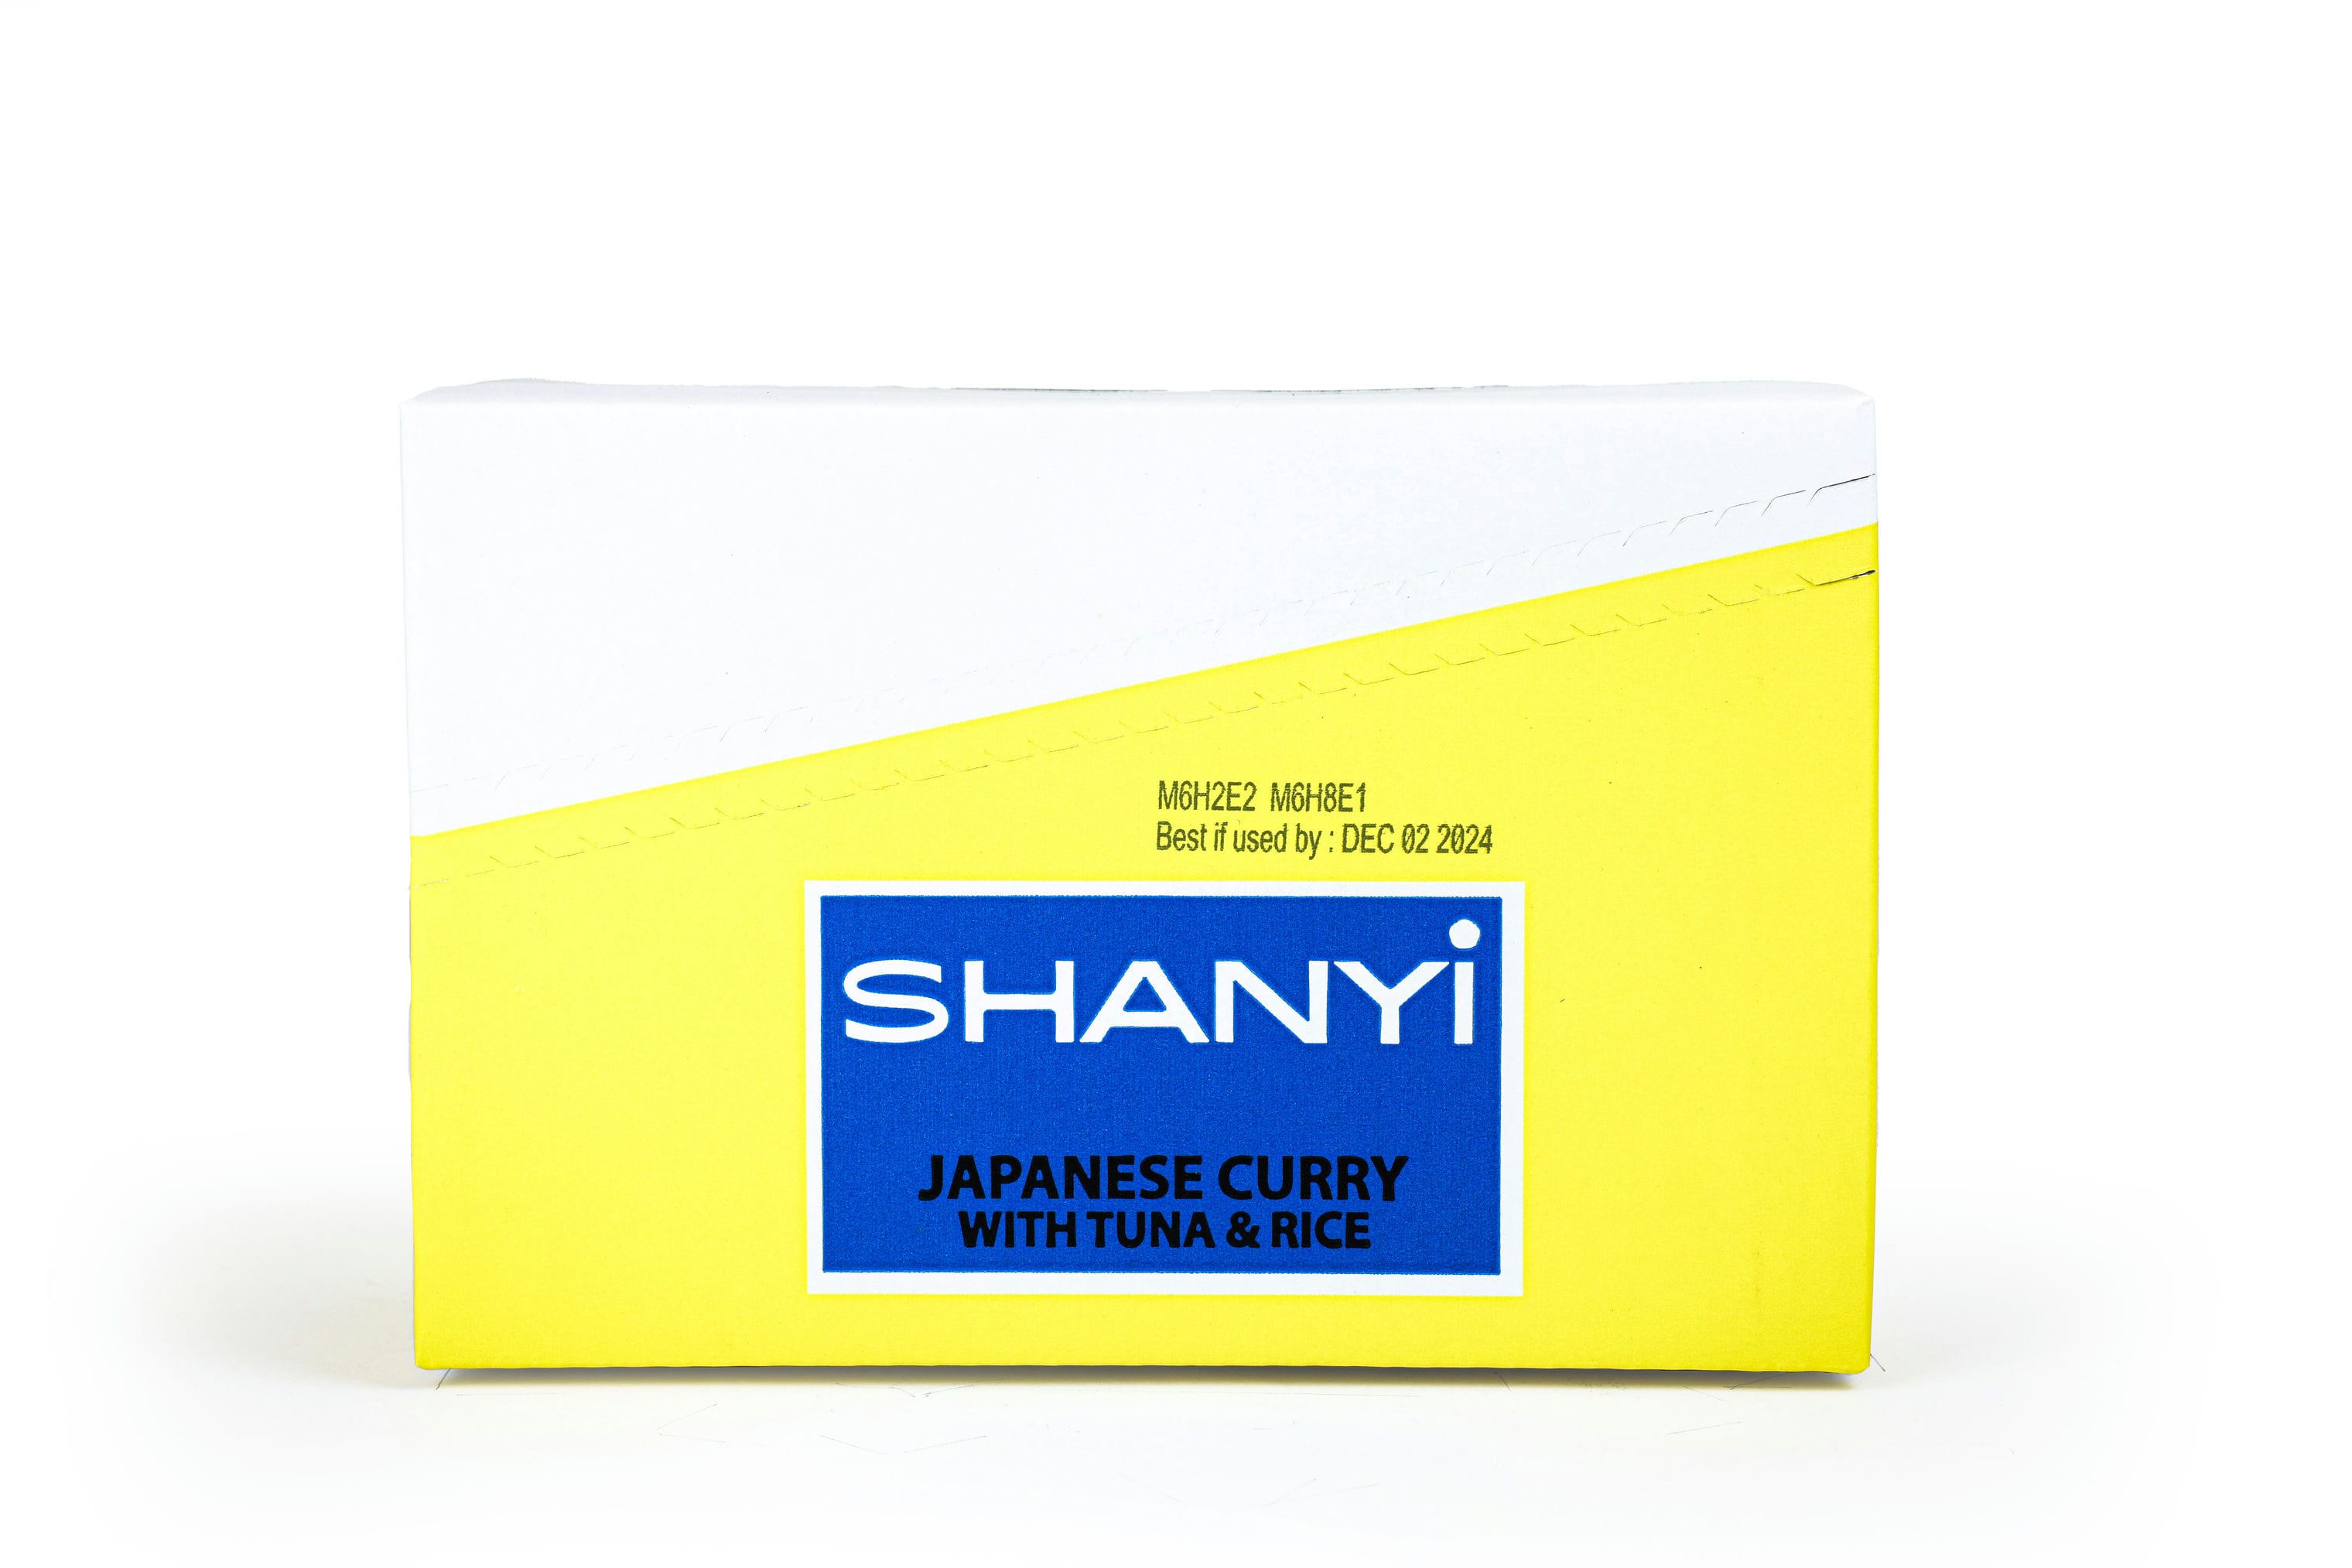 ShanYi Instant Microwave Meals Ready to Eat, 250g/8.8oz, Japanese Curry with Tuna and Jasmine Rice, Case of 6